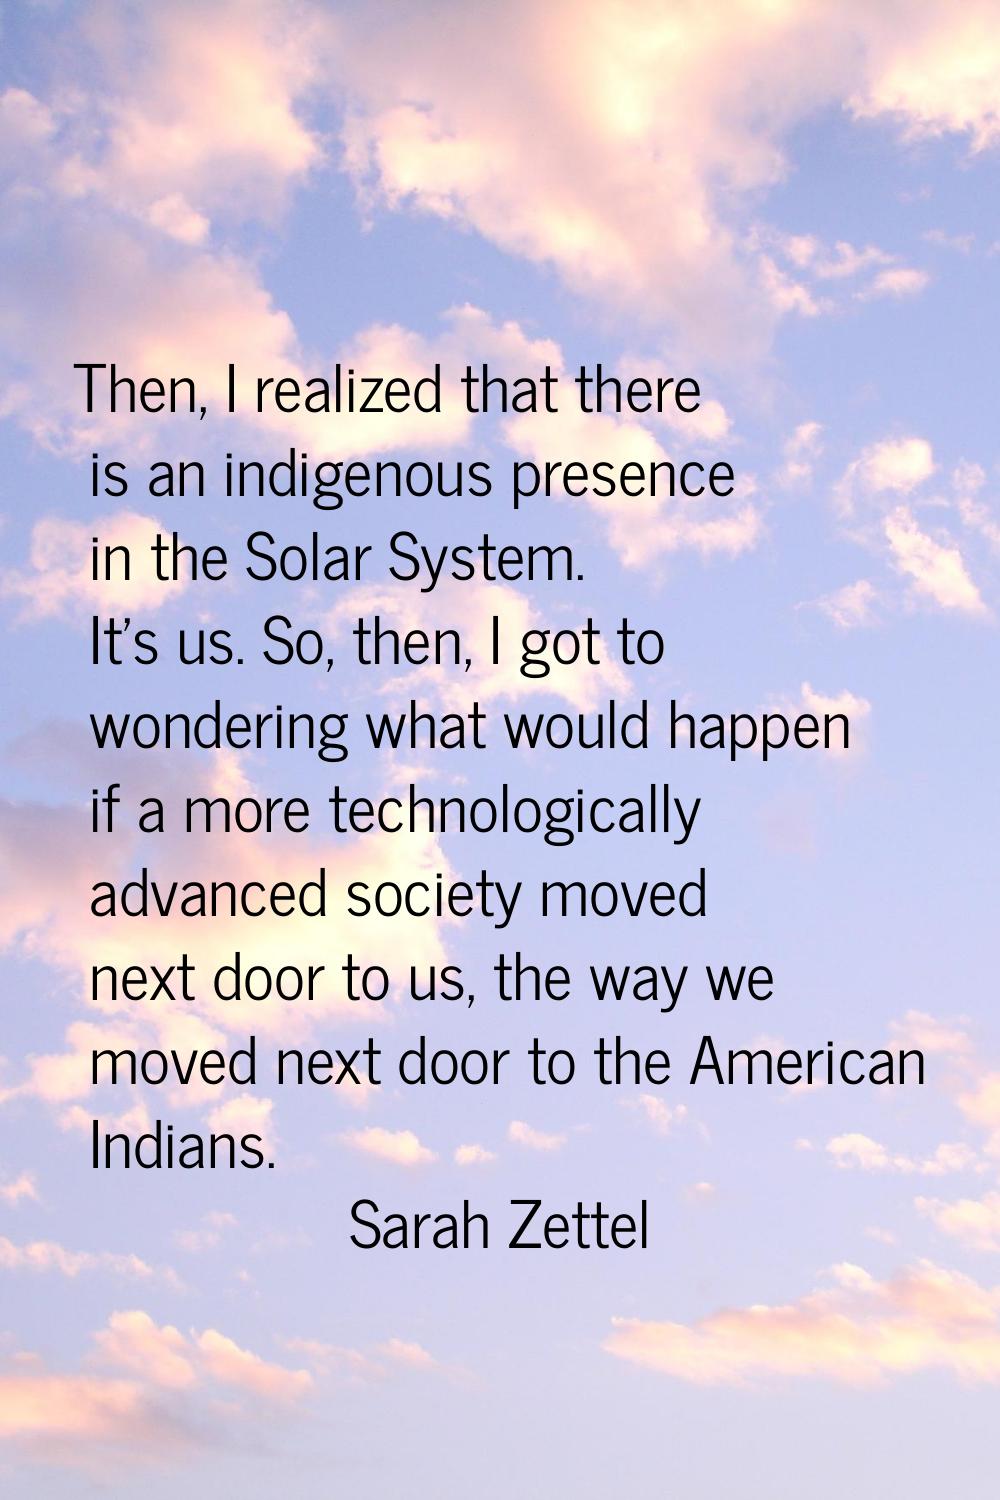 Then, I realized that there is an indigenous presence in the Solar System. It's us. So, then, I got